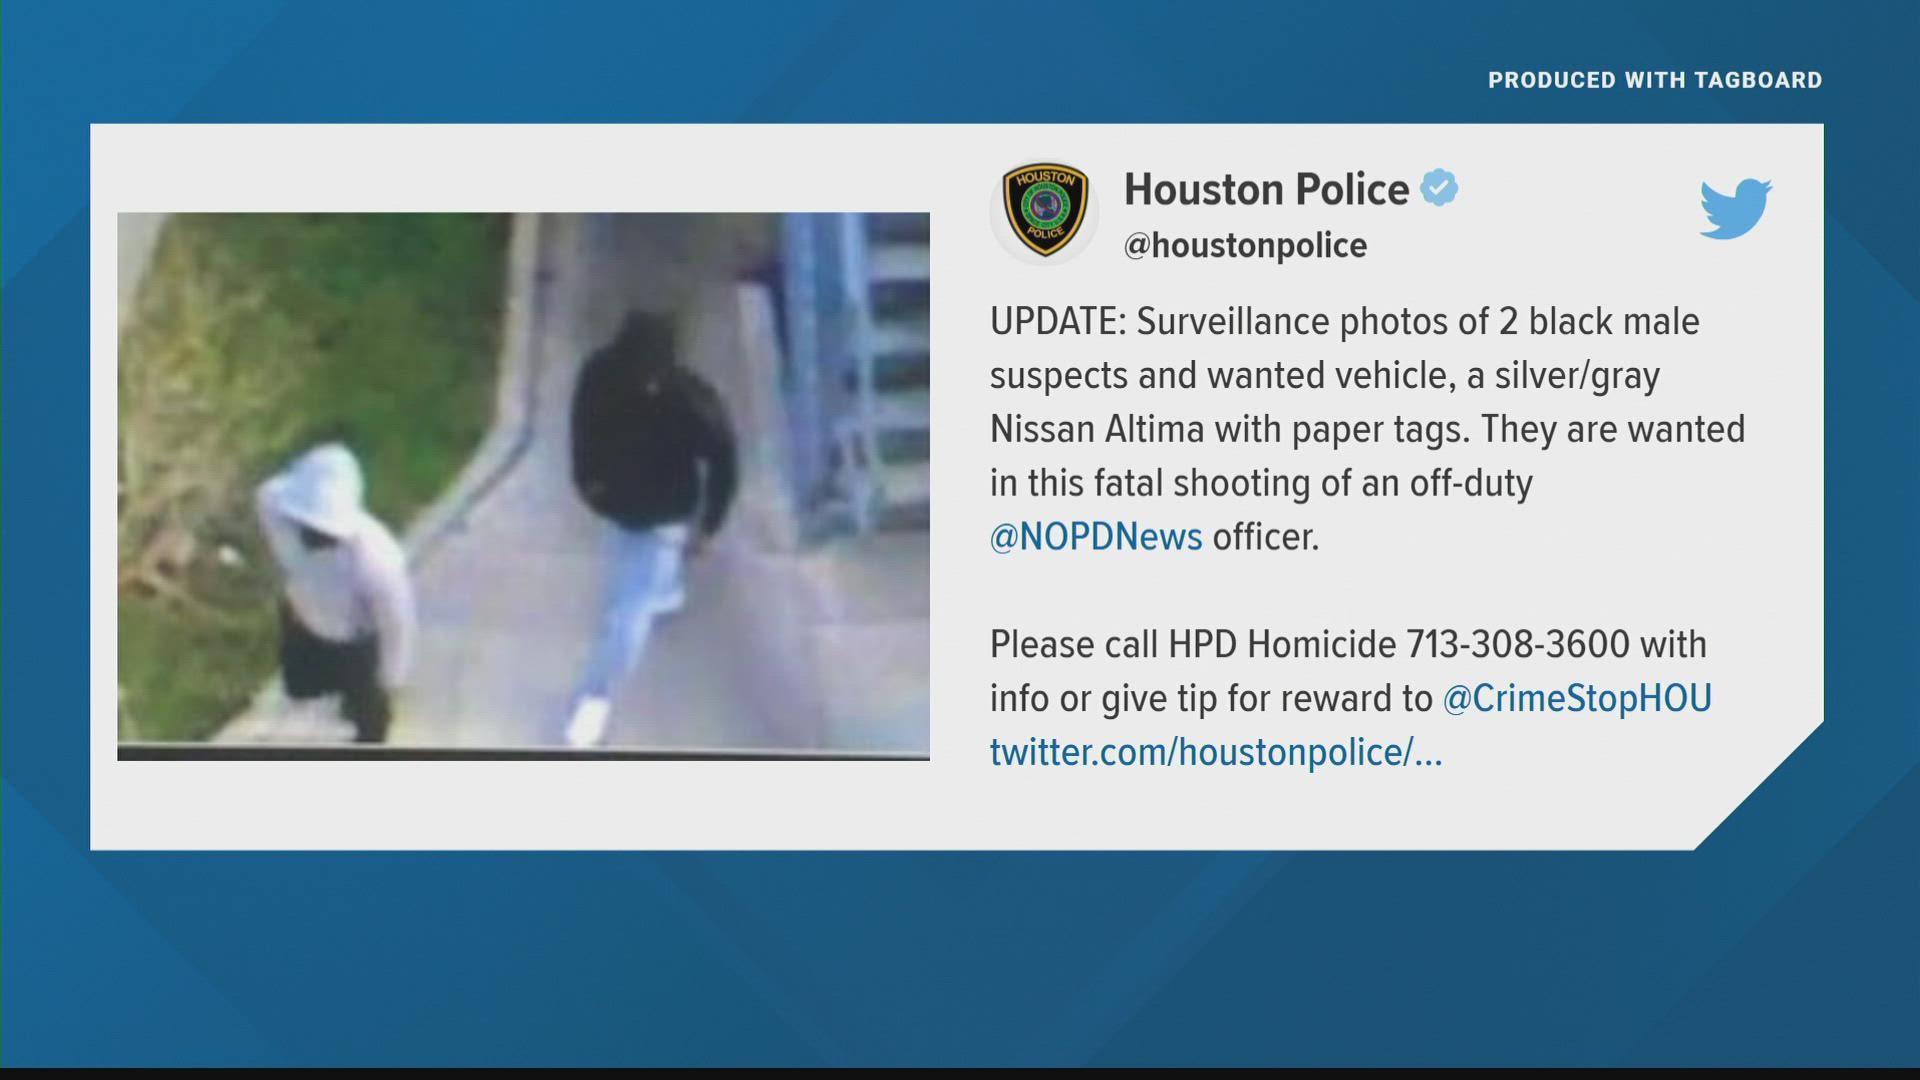 Houston Police are looking for the person responsible for the shooting death of an NOPD officer at a Houston restaurant.